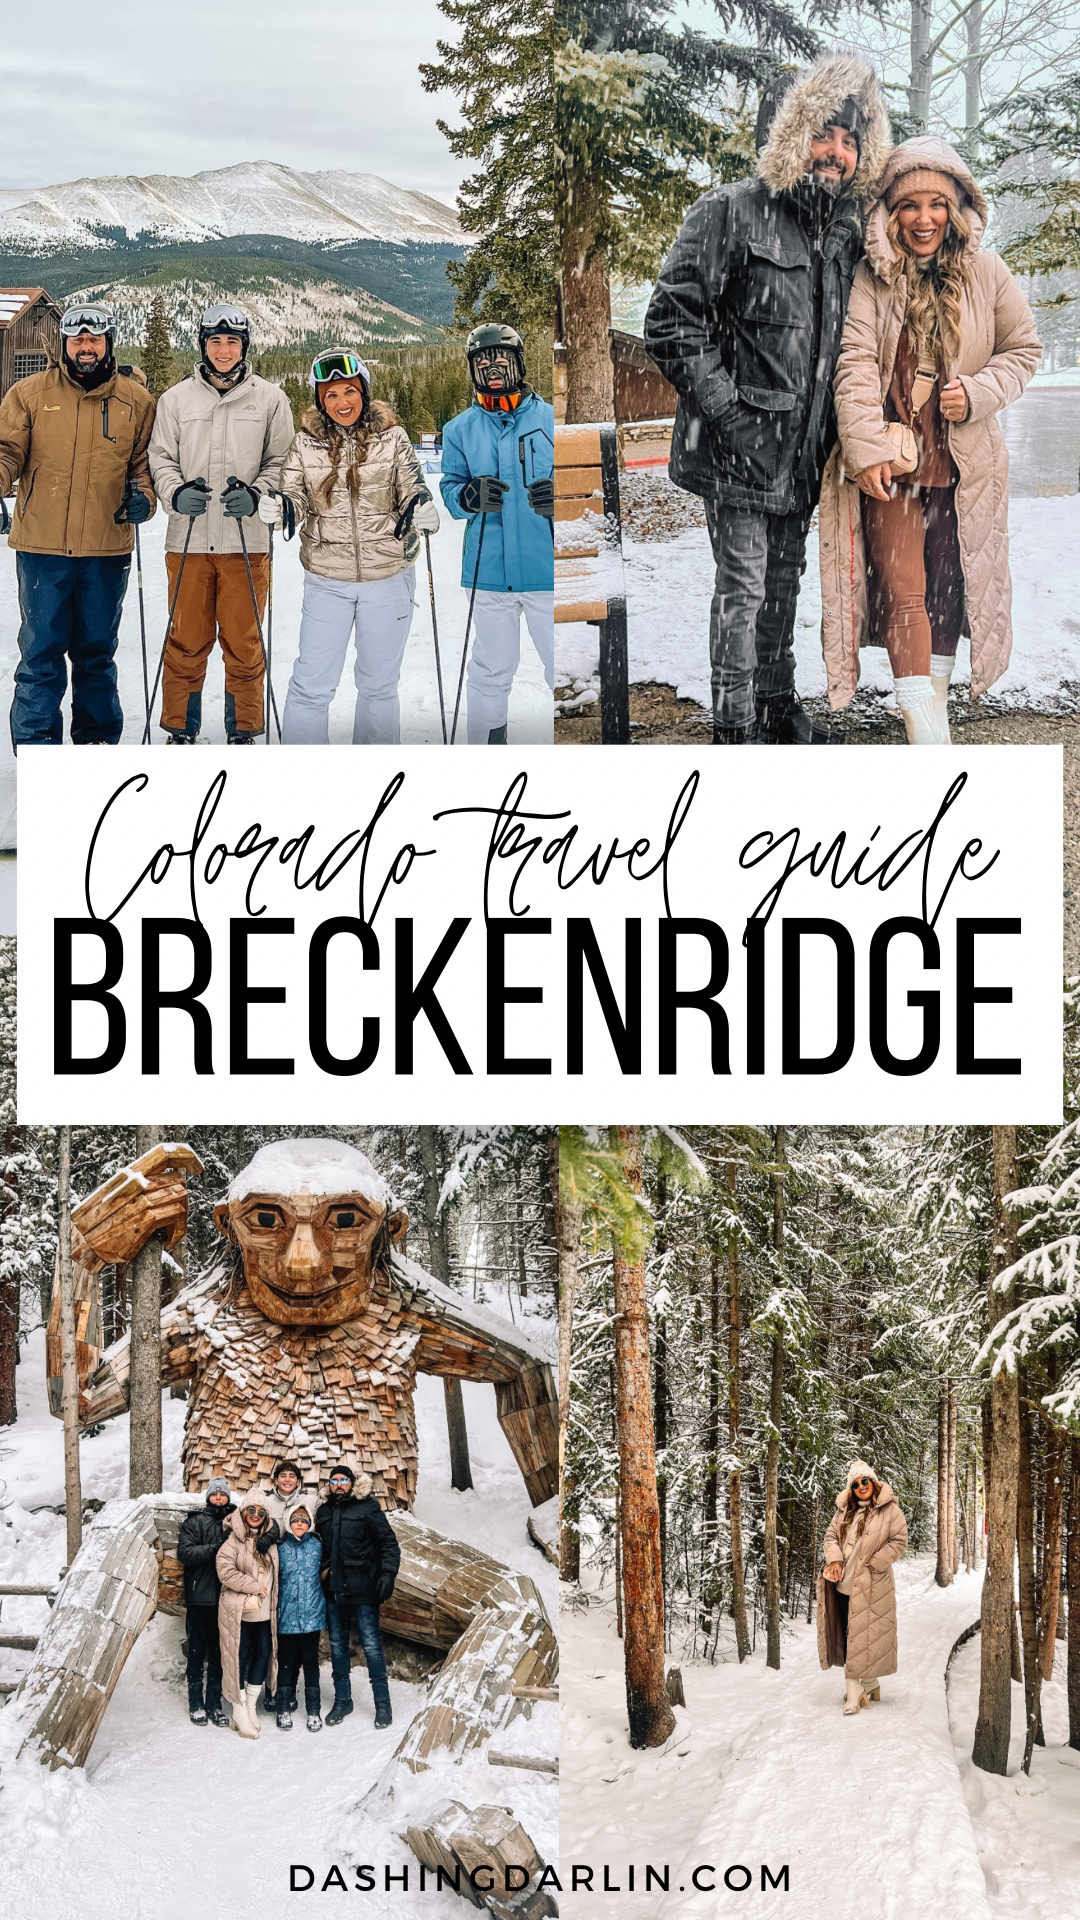 BRECKENRIDGE SKI TRIP WITH THE FAMILY - SHARING ALL OF THE DETAILS FROM SKI RENTALS TO LODGING TO RESTAURANTS.